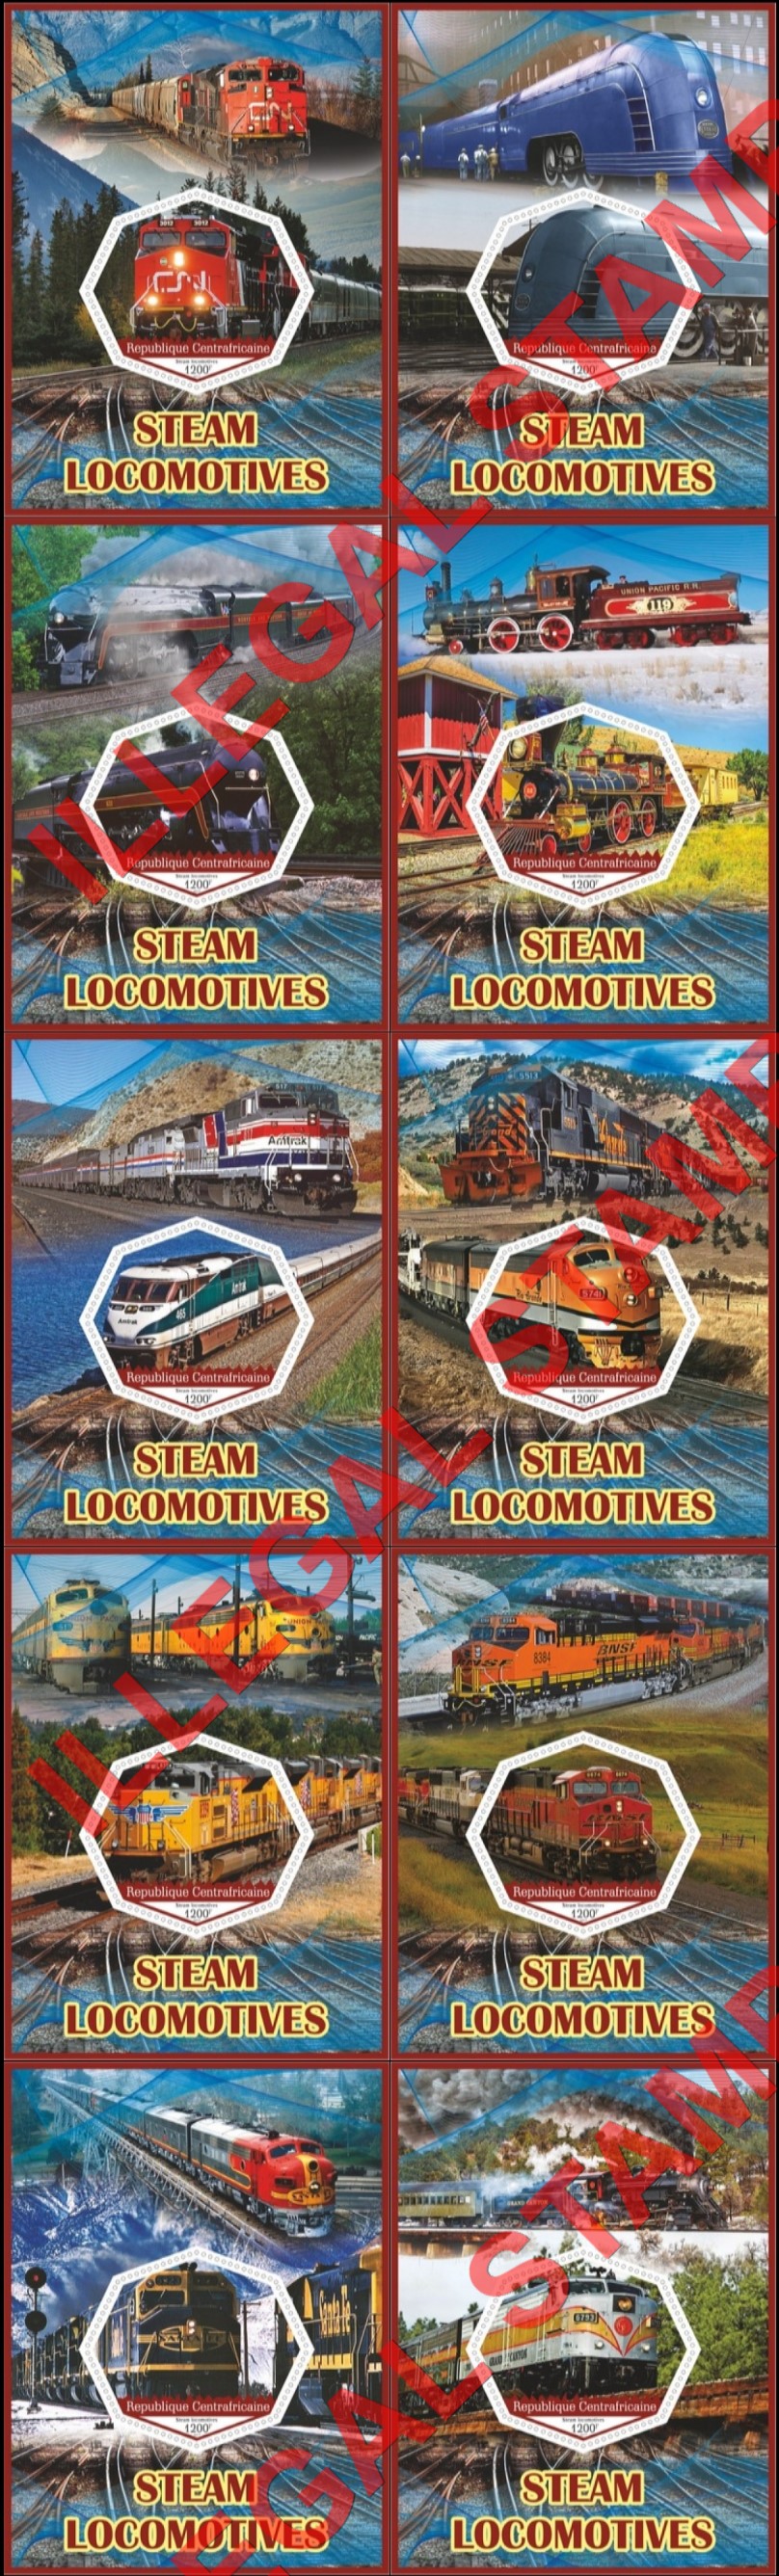 Central African Republic 2017 Steam Locomotives Illegal Stamp Souvenir Sheets of 1